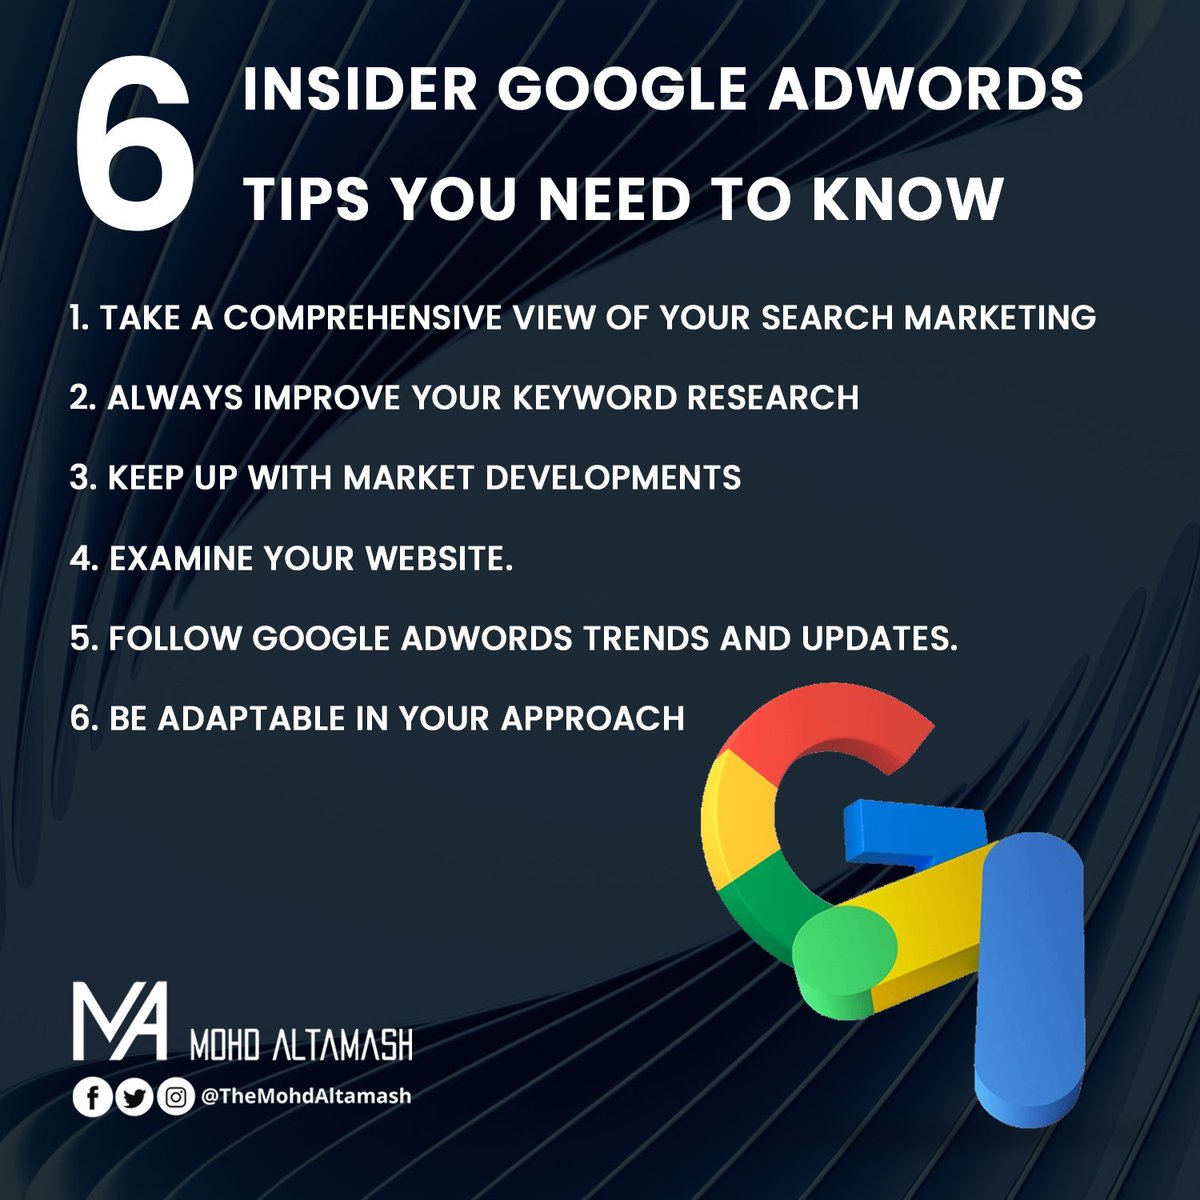 6 insider Google AdWords tips You need to know

#altamash #googleadwords #googleadstips #googleadscampaign #googleads #googleadsexpert #googleadsmarketing #paidcampaigns